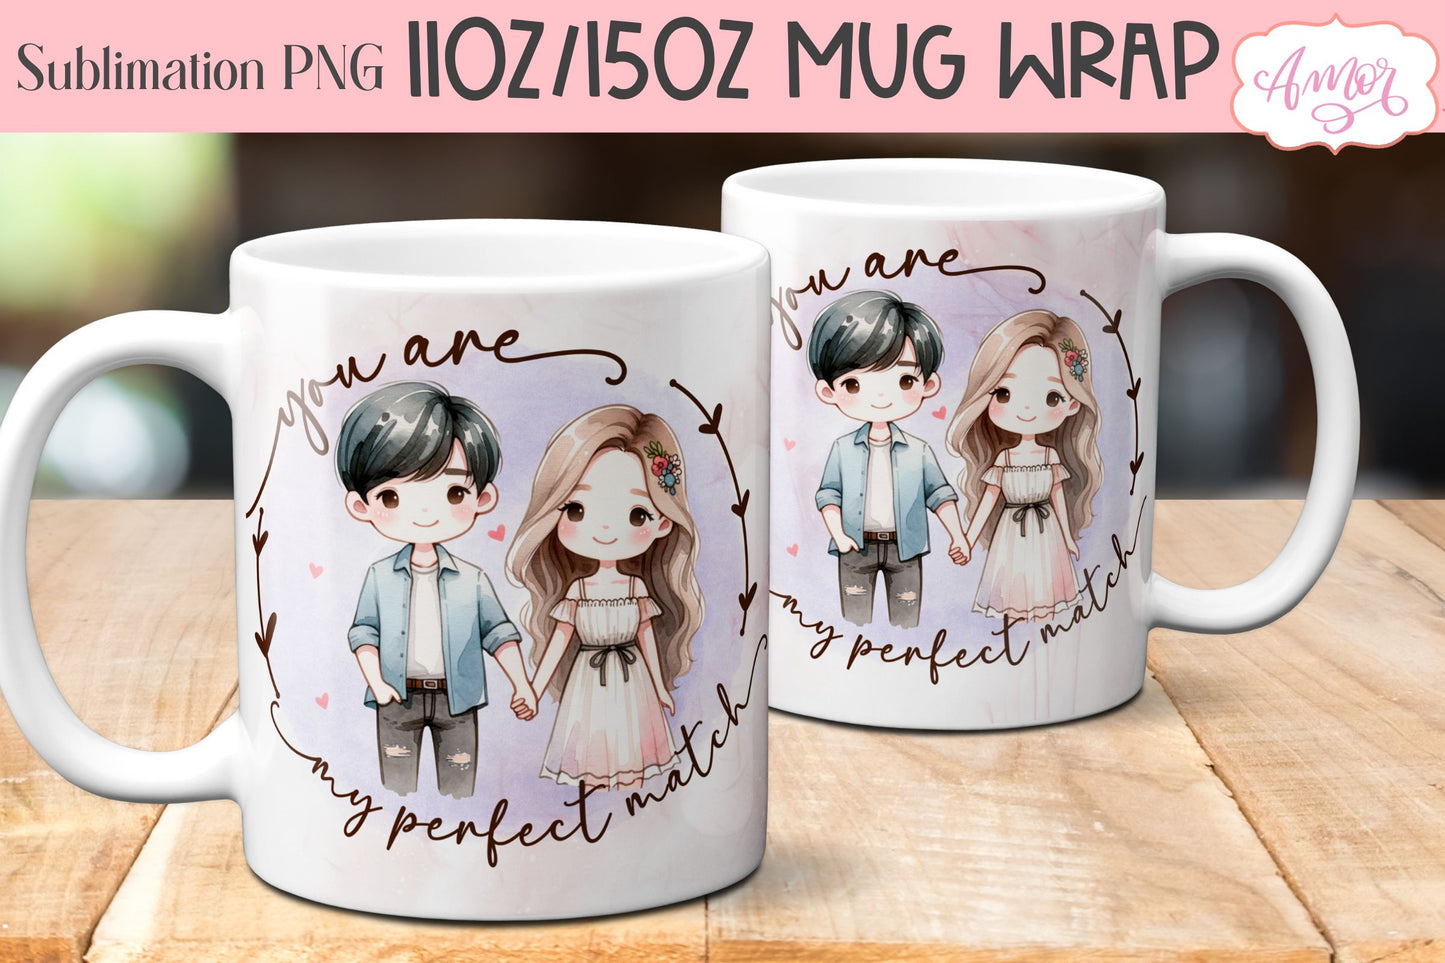 Cute Valentine's Day mug Wrap PNG for Sublimation